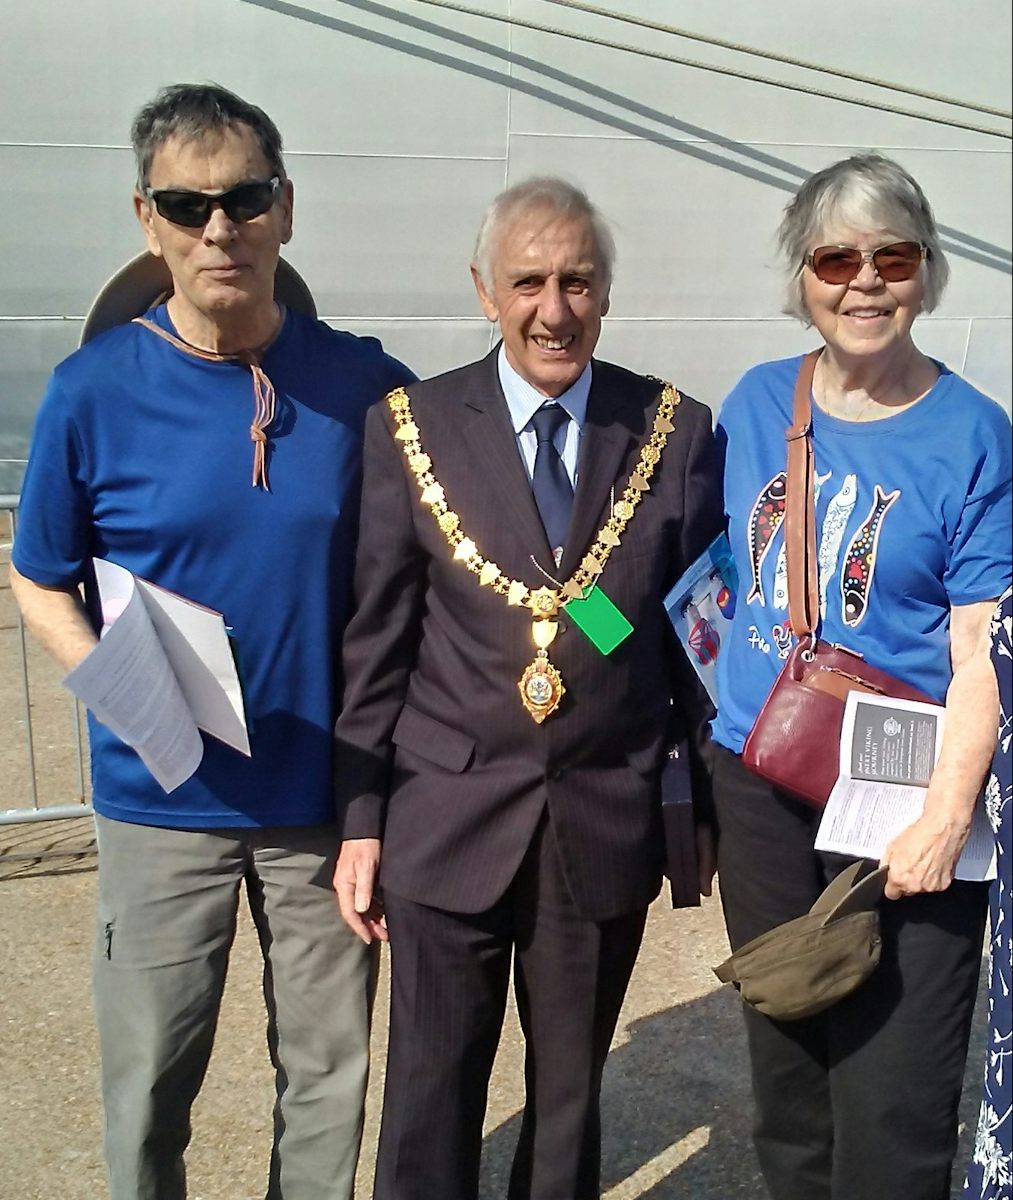 This is a picture of Jeff and Judy Rempala with the mayor of Porto, Portuga